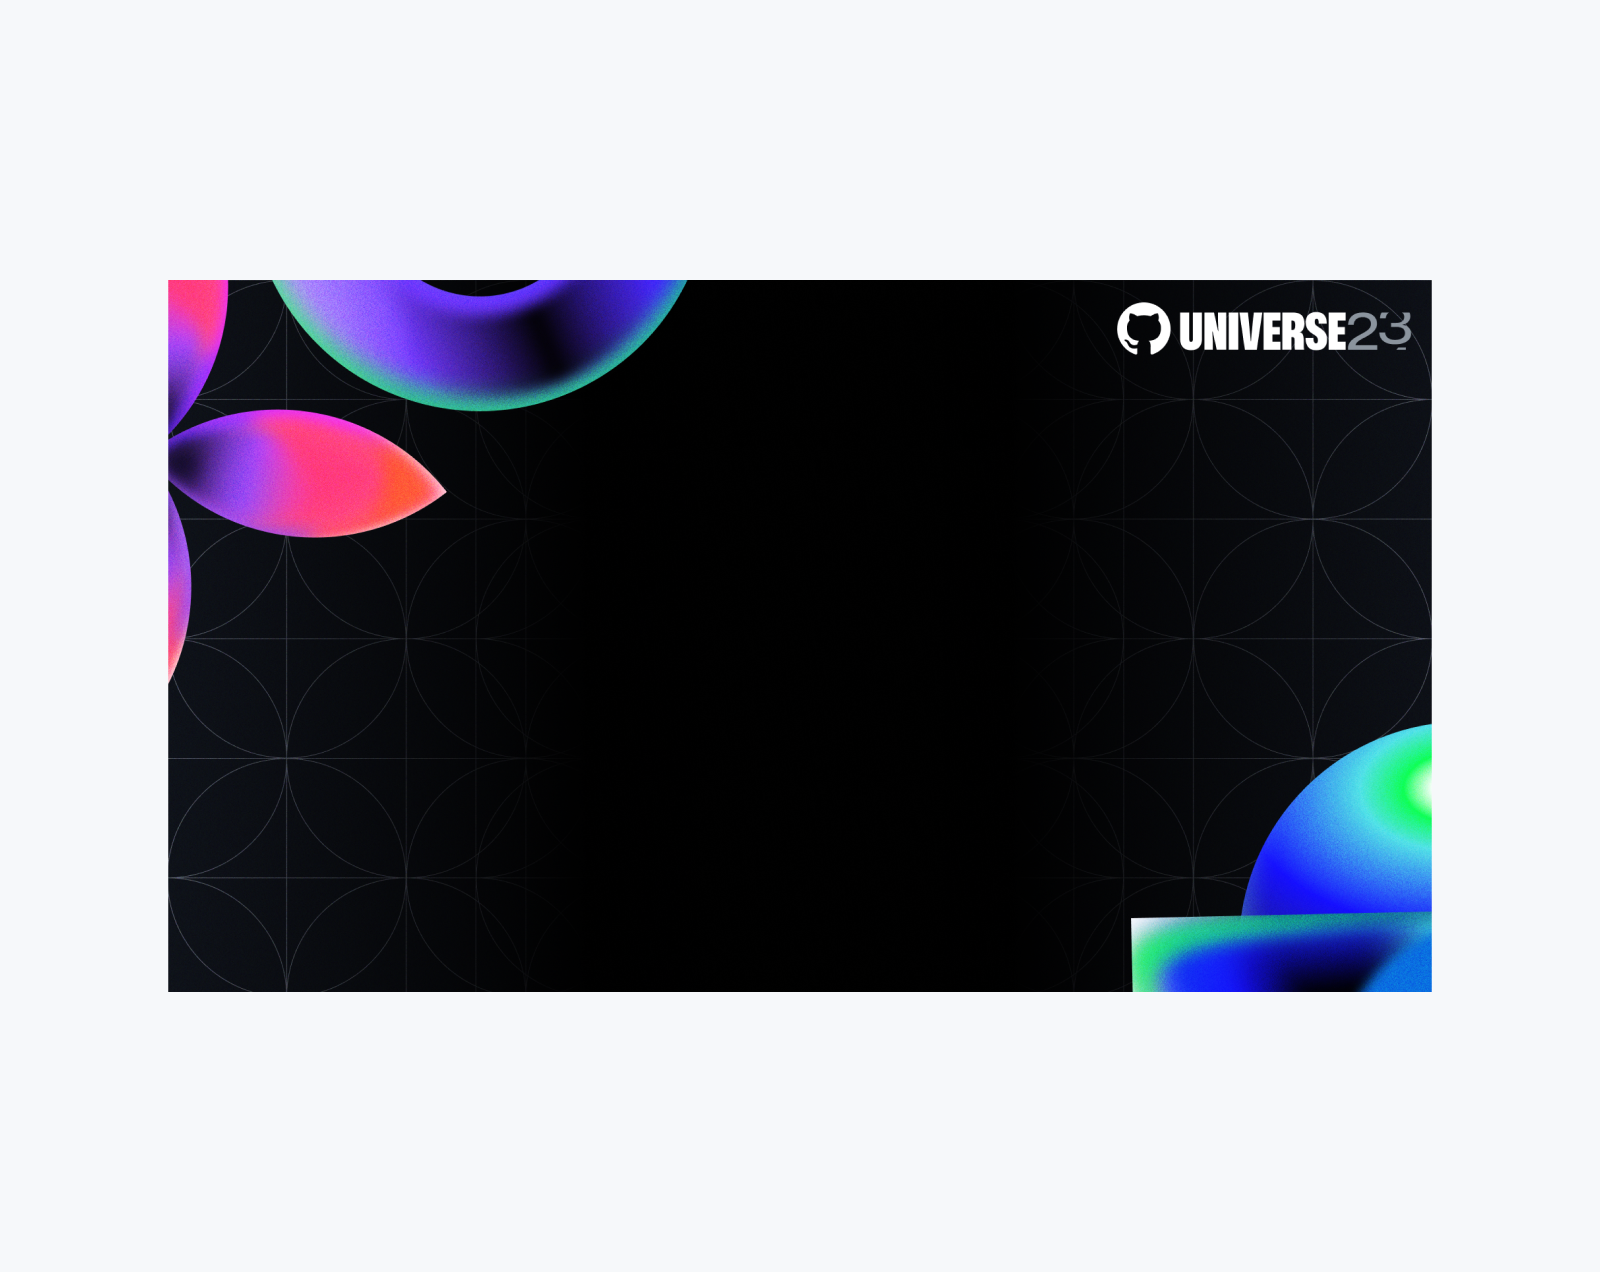 A black rectangular asset with colorful abstract shapes coming in from the edges. The logo for GitHub Univers 2023 is in the corner.